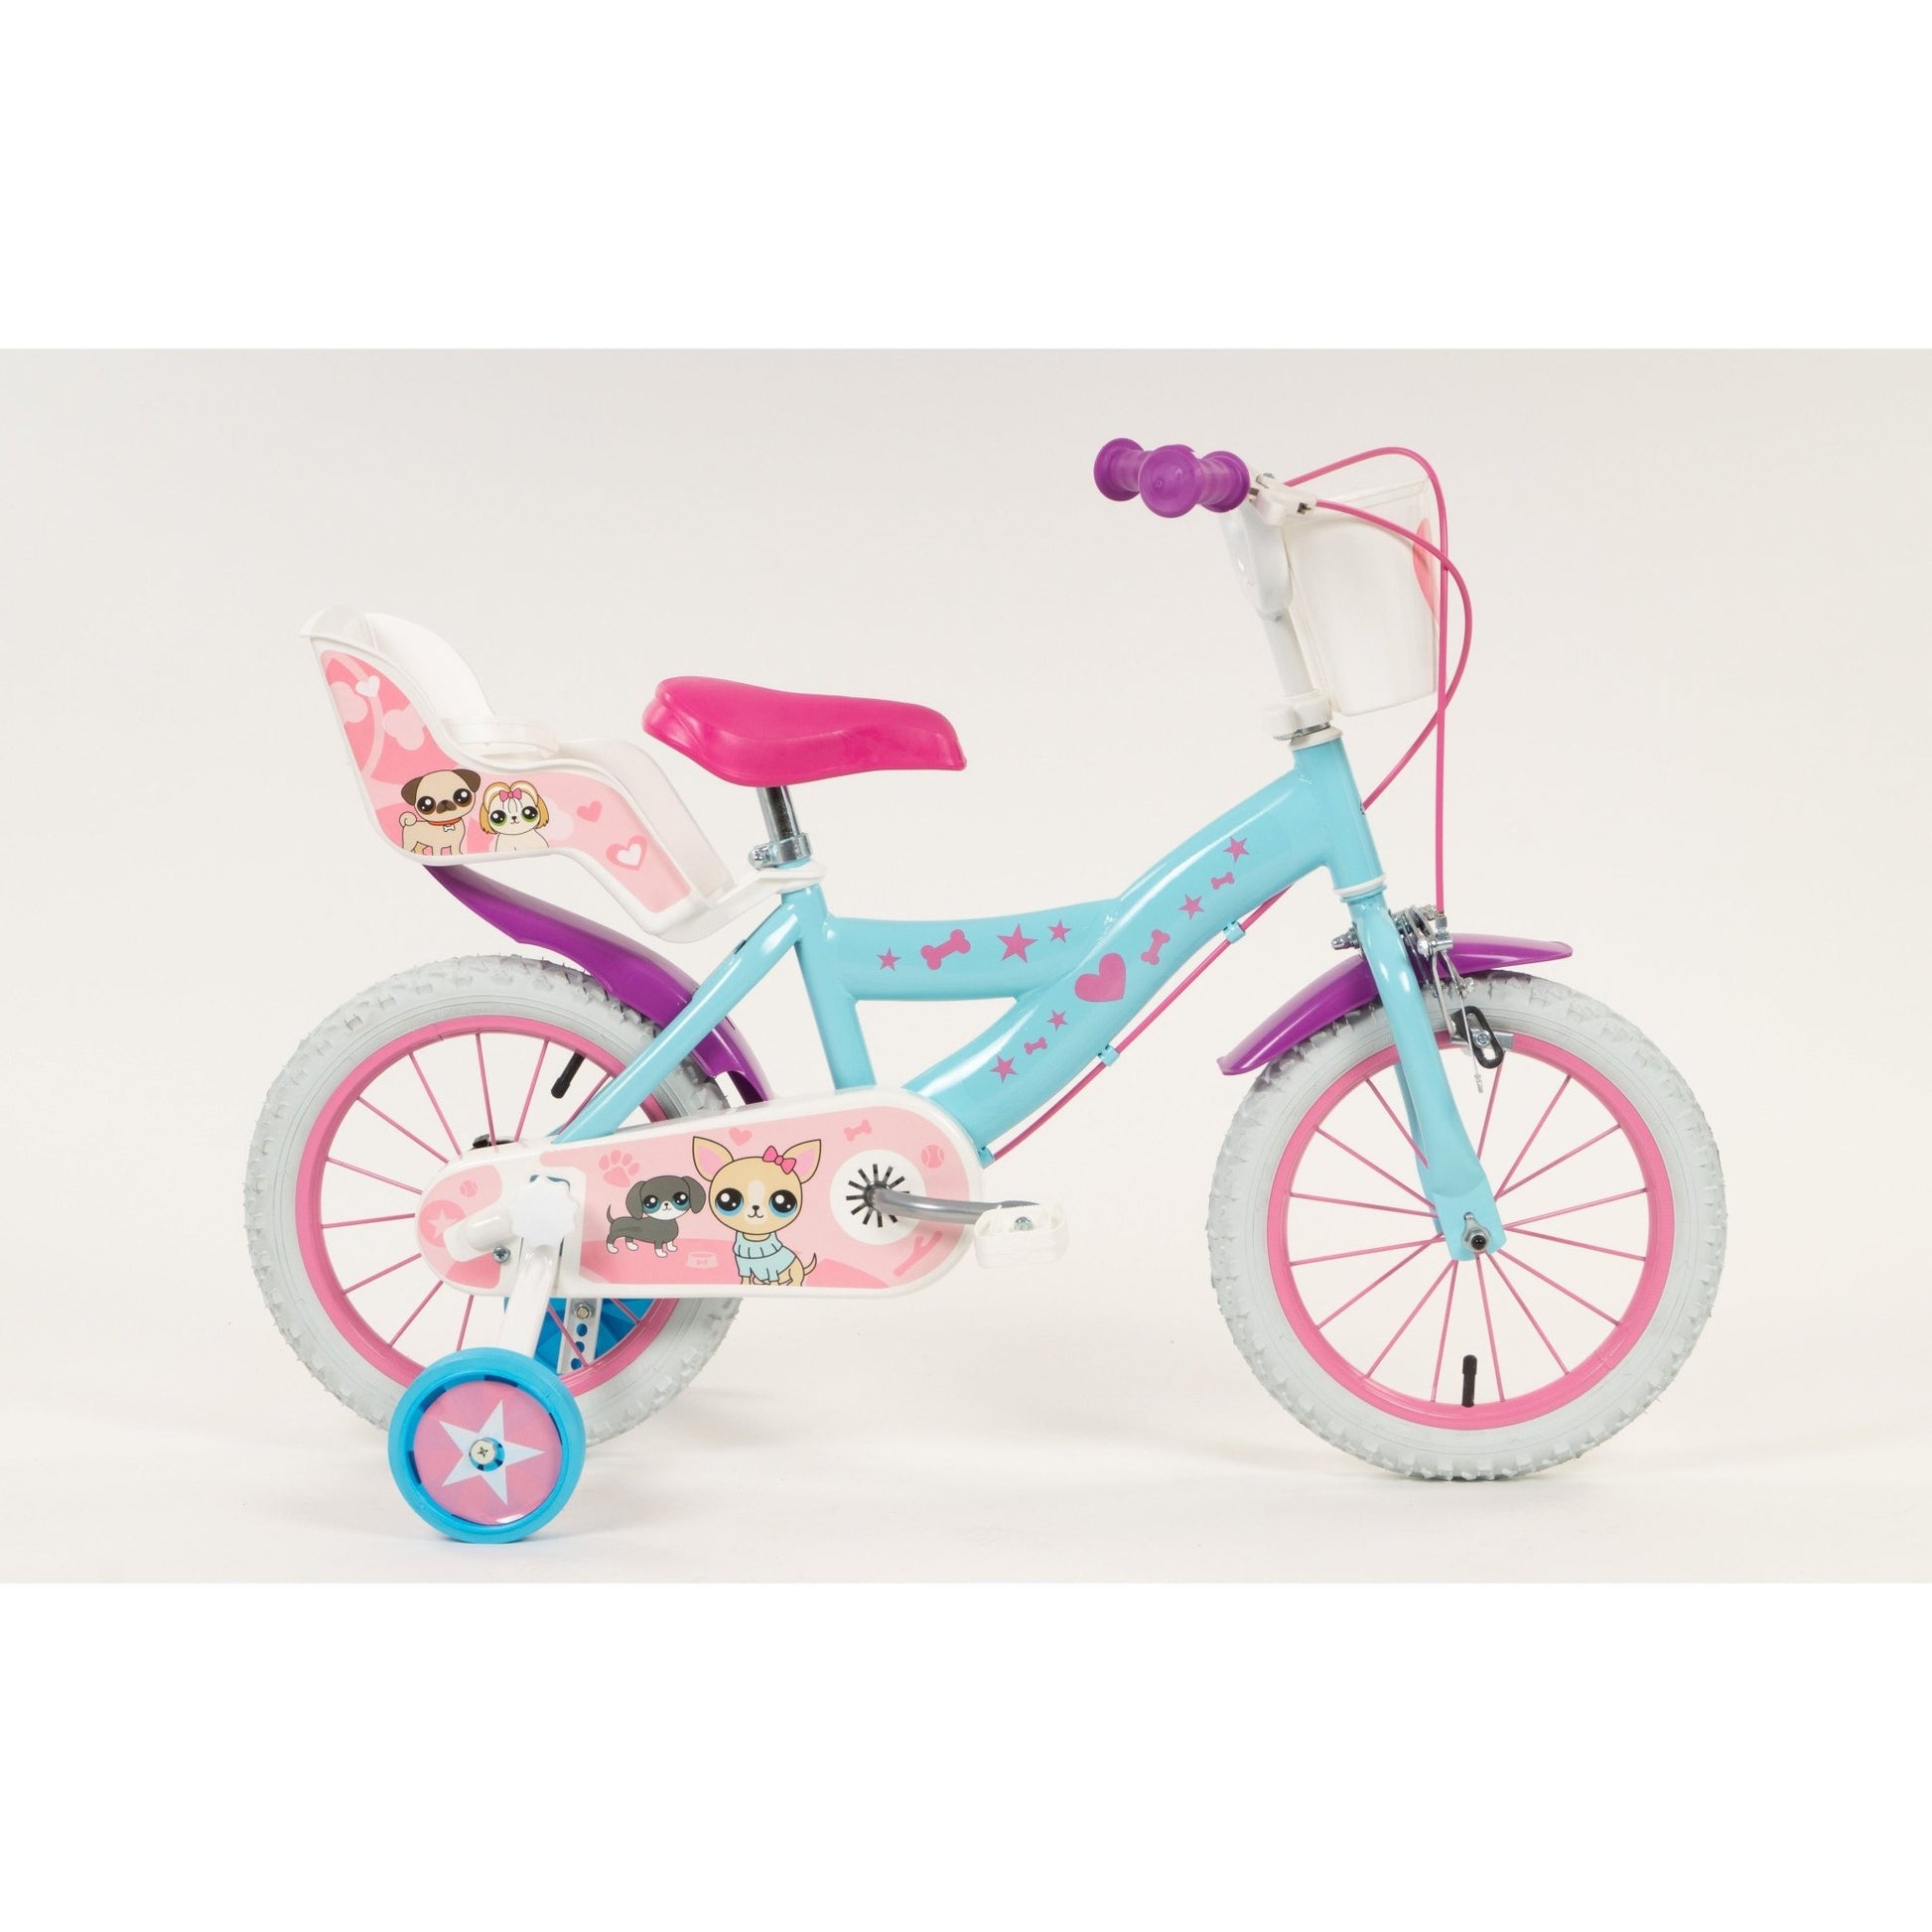 Pets Childrens Bicycle - Available in 3 Sizes - The Online Toy Shop - Bicycle - 9